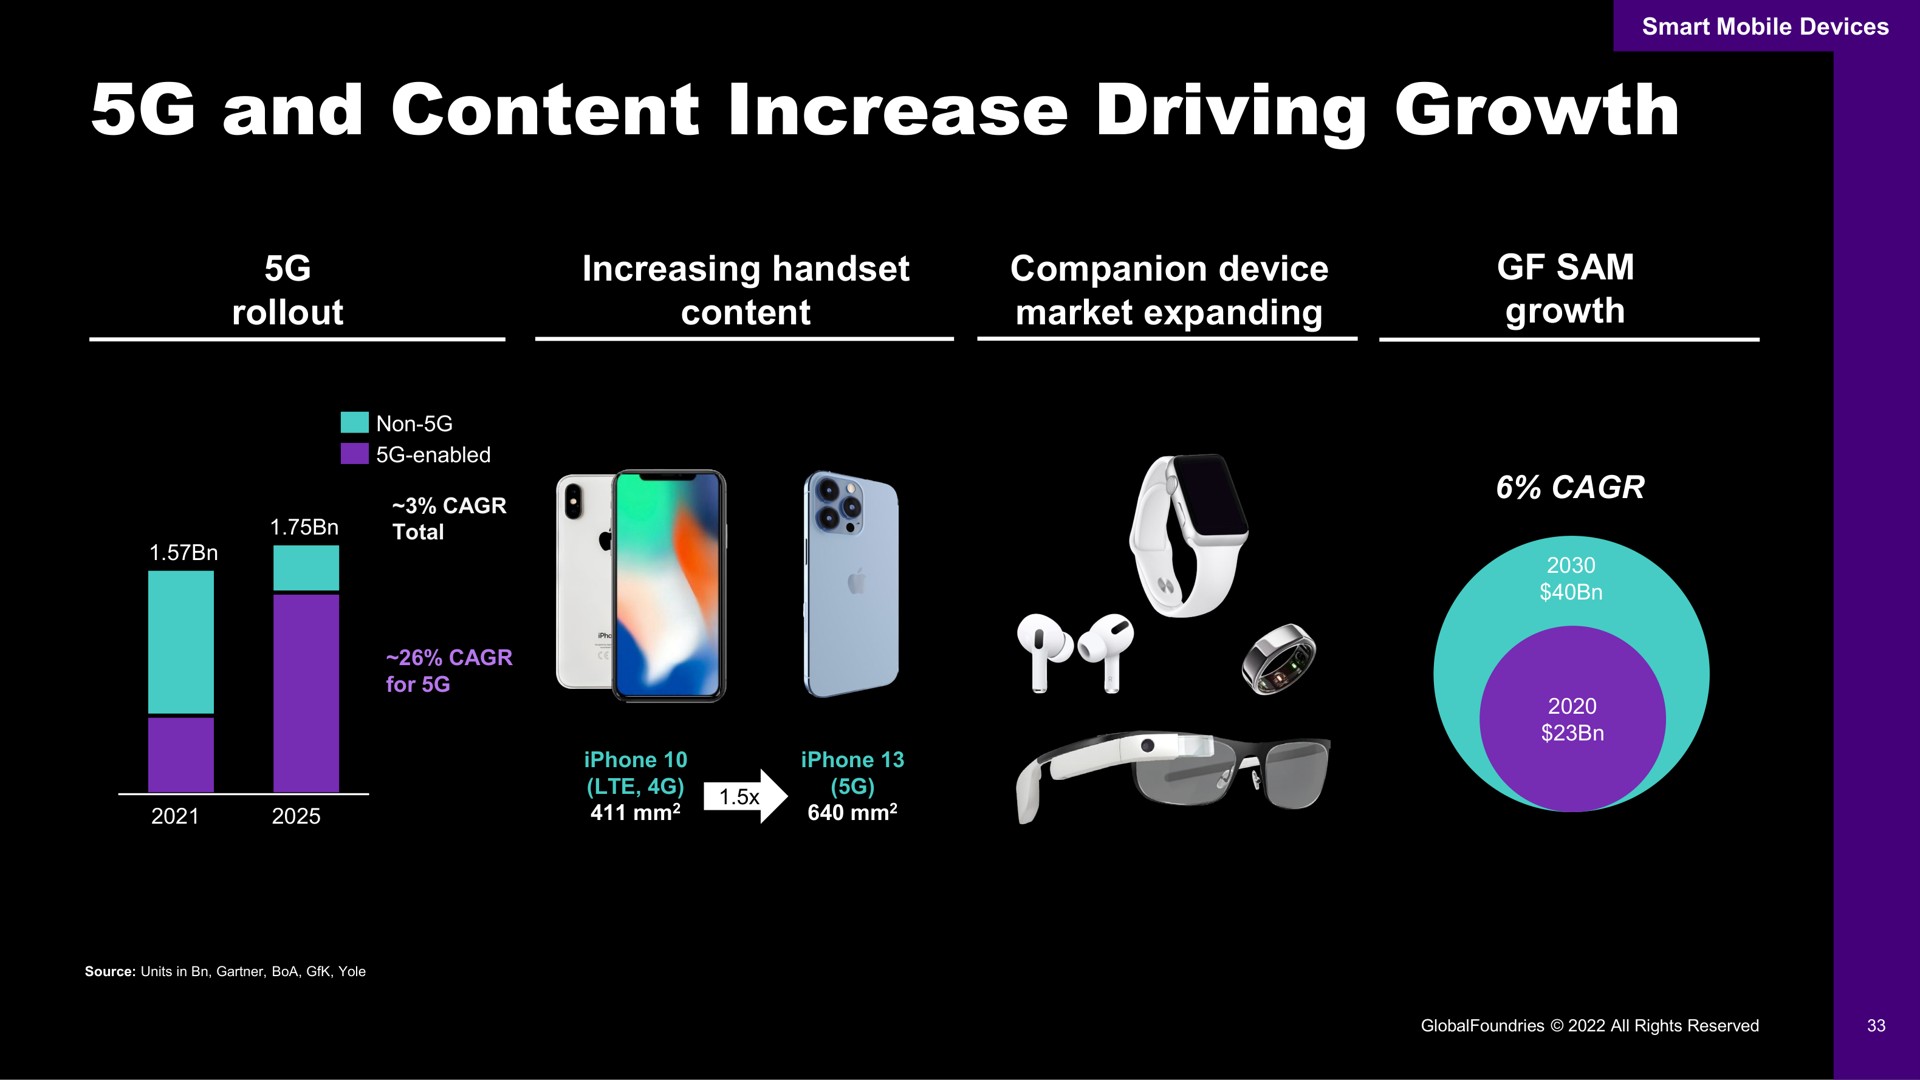 and content increase driving growth | GlobalFoundries